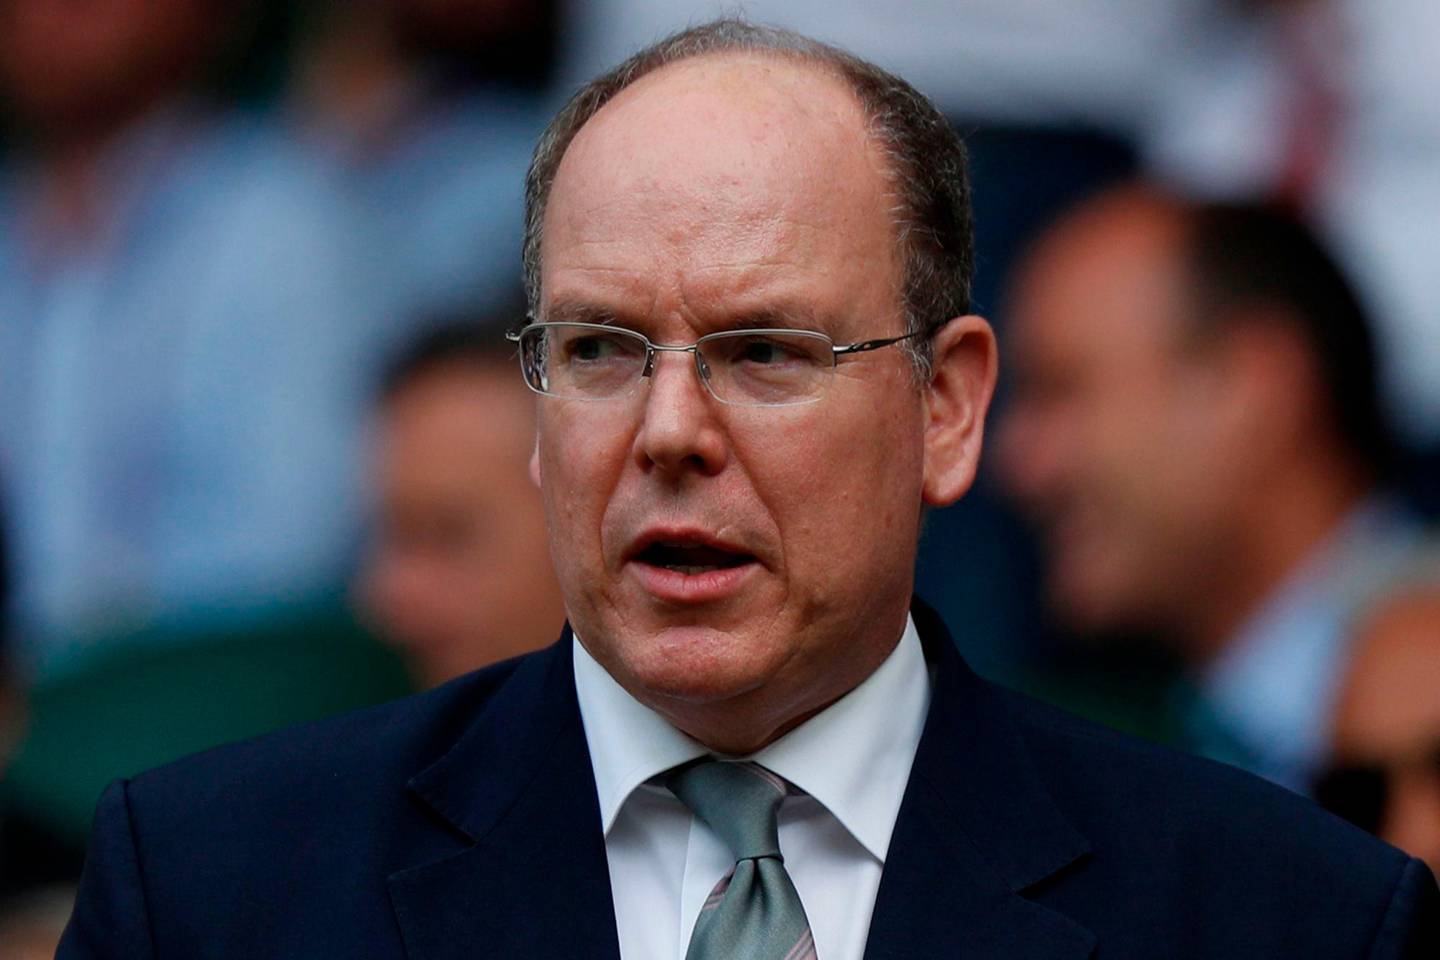 (FILES)This file photo taken on July 10, 2019 shows Prince Albert II of Monaco attending a match at the 2019 Wimbledon Championships at The All England Lawn Tennis Club in Wimbledon, southwest London. - Monaco's Prince Albert II has tested positive for the novel coronavirus, the principality said in a statement on March 19, 2020, adding there were "no concerns for his health". (Photo by Adrian DENNIS / AFP) / RESTRICTED TO EDITORIAL USE